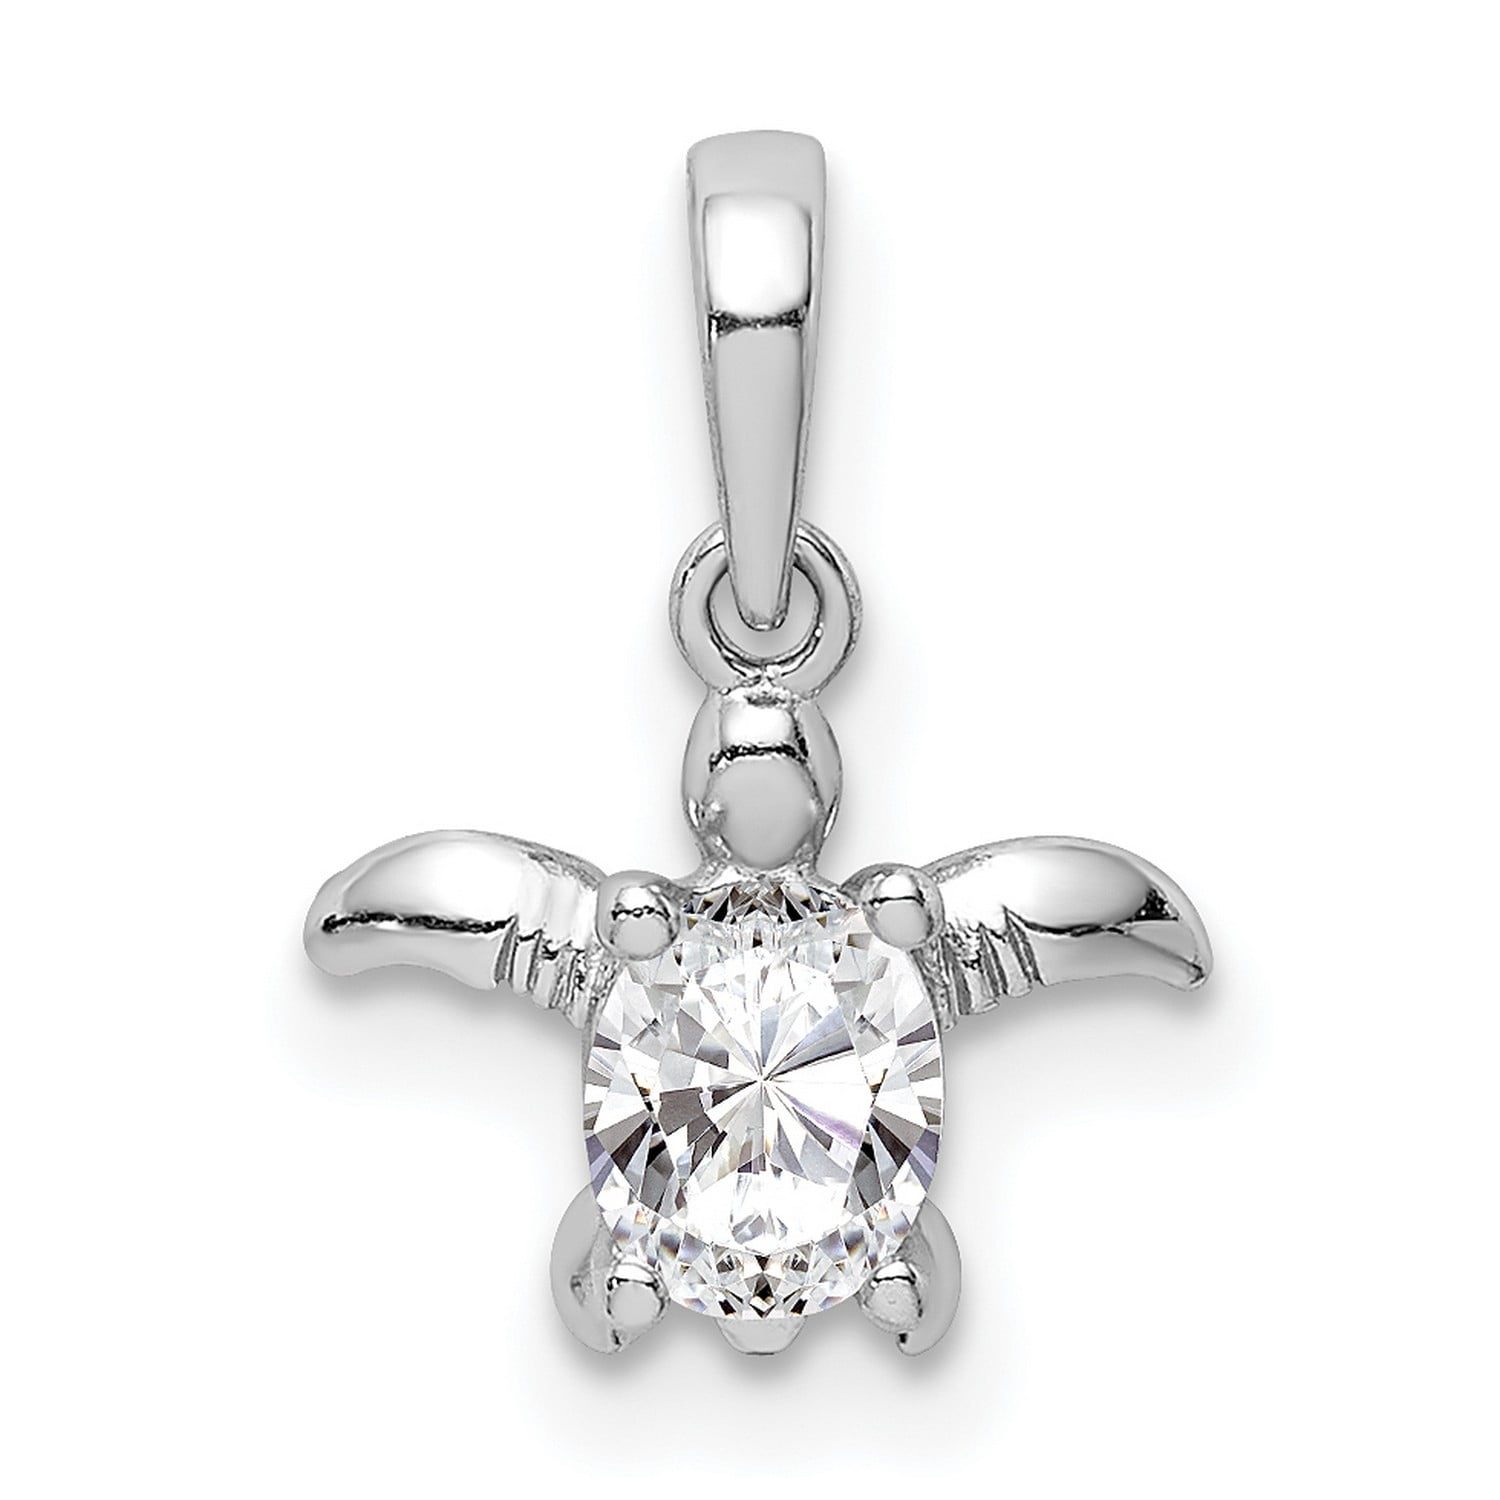 8mm x 10mm Solid 925 Sterling Silver CZ Cubic Zirconia Turtle Pendant Charm 